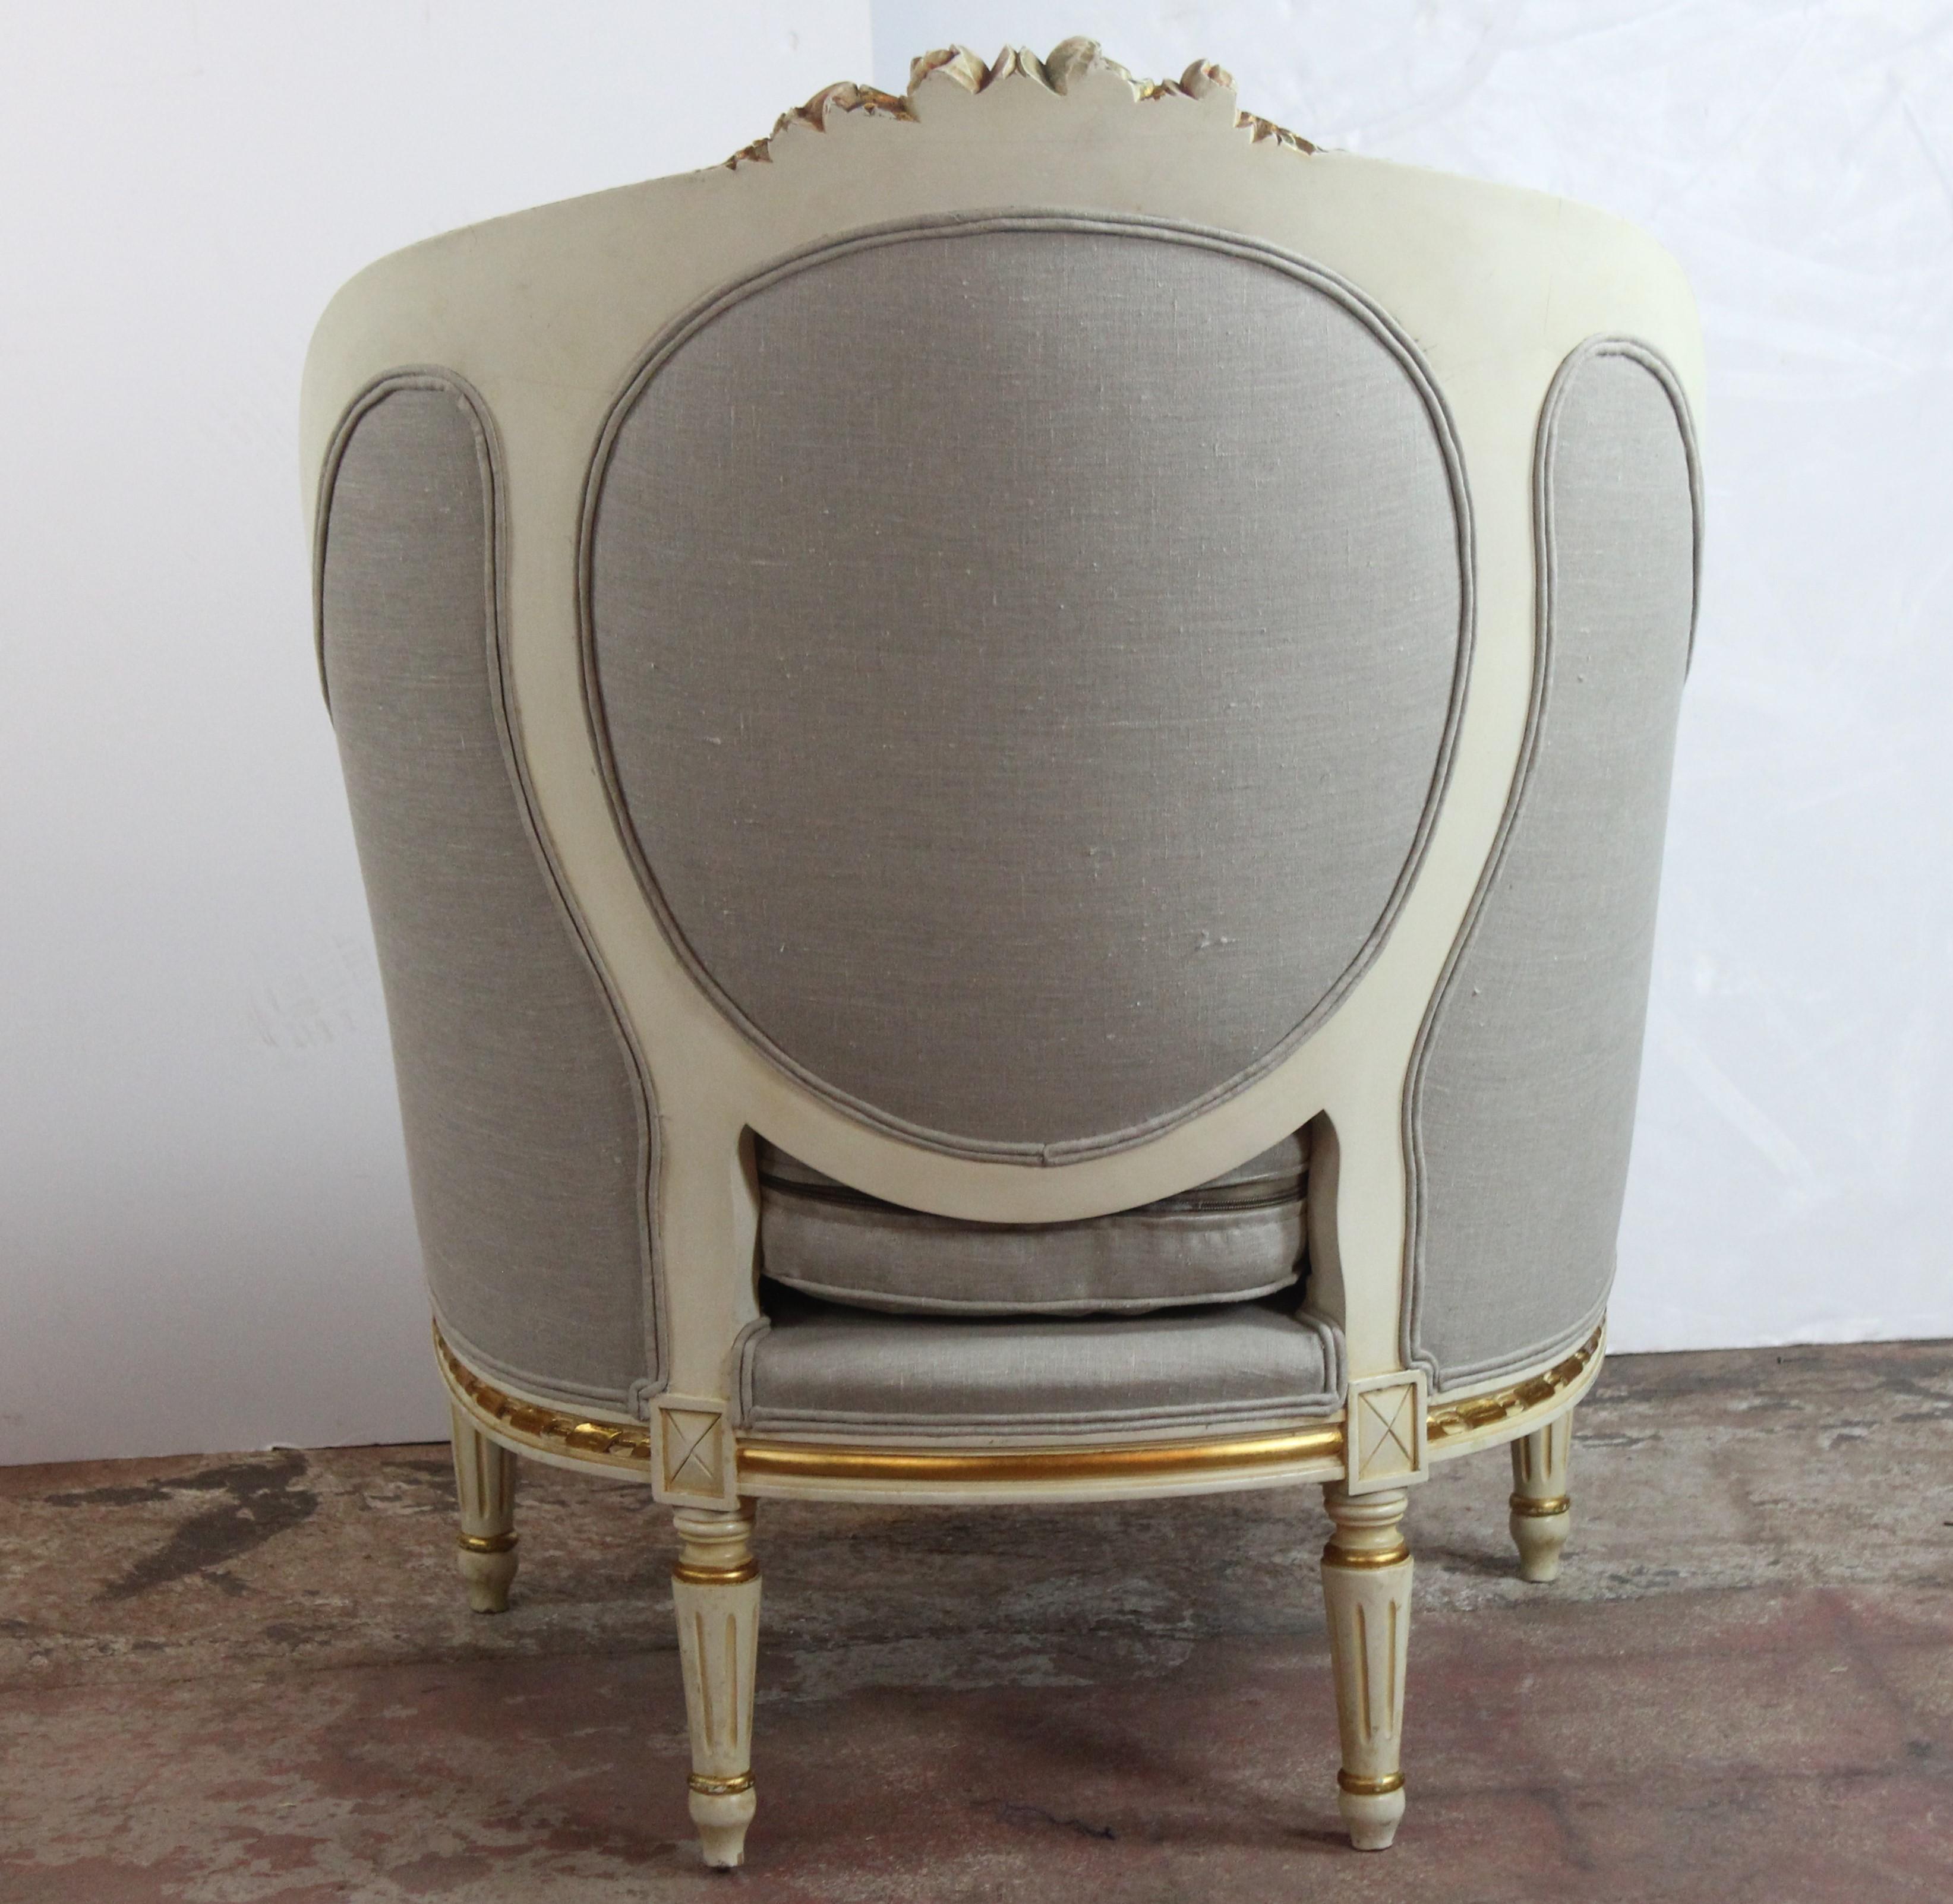 Louis XVI style barrel back chairs wood carved with gold accents. Upholstered linen.